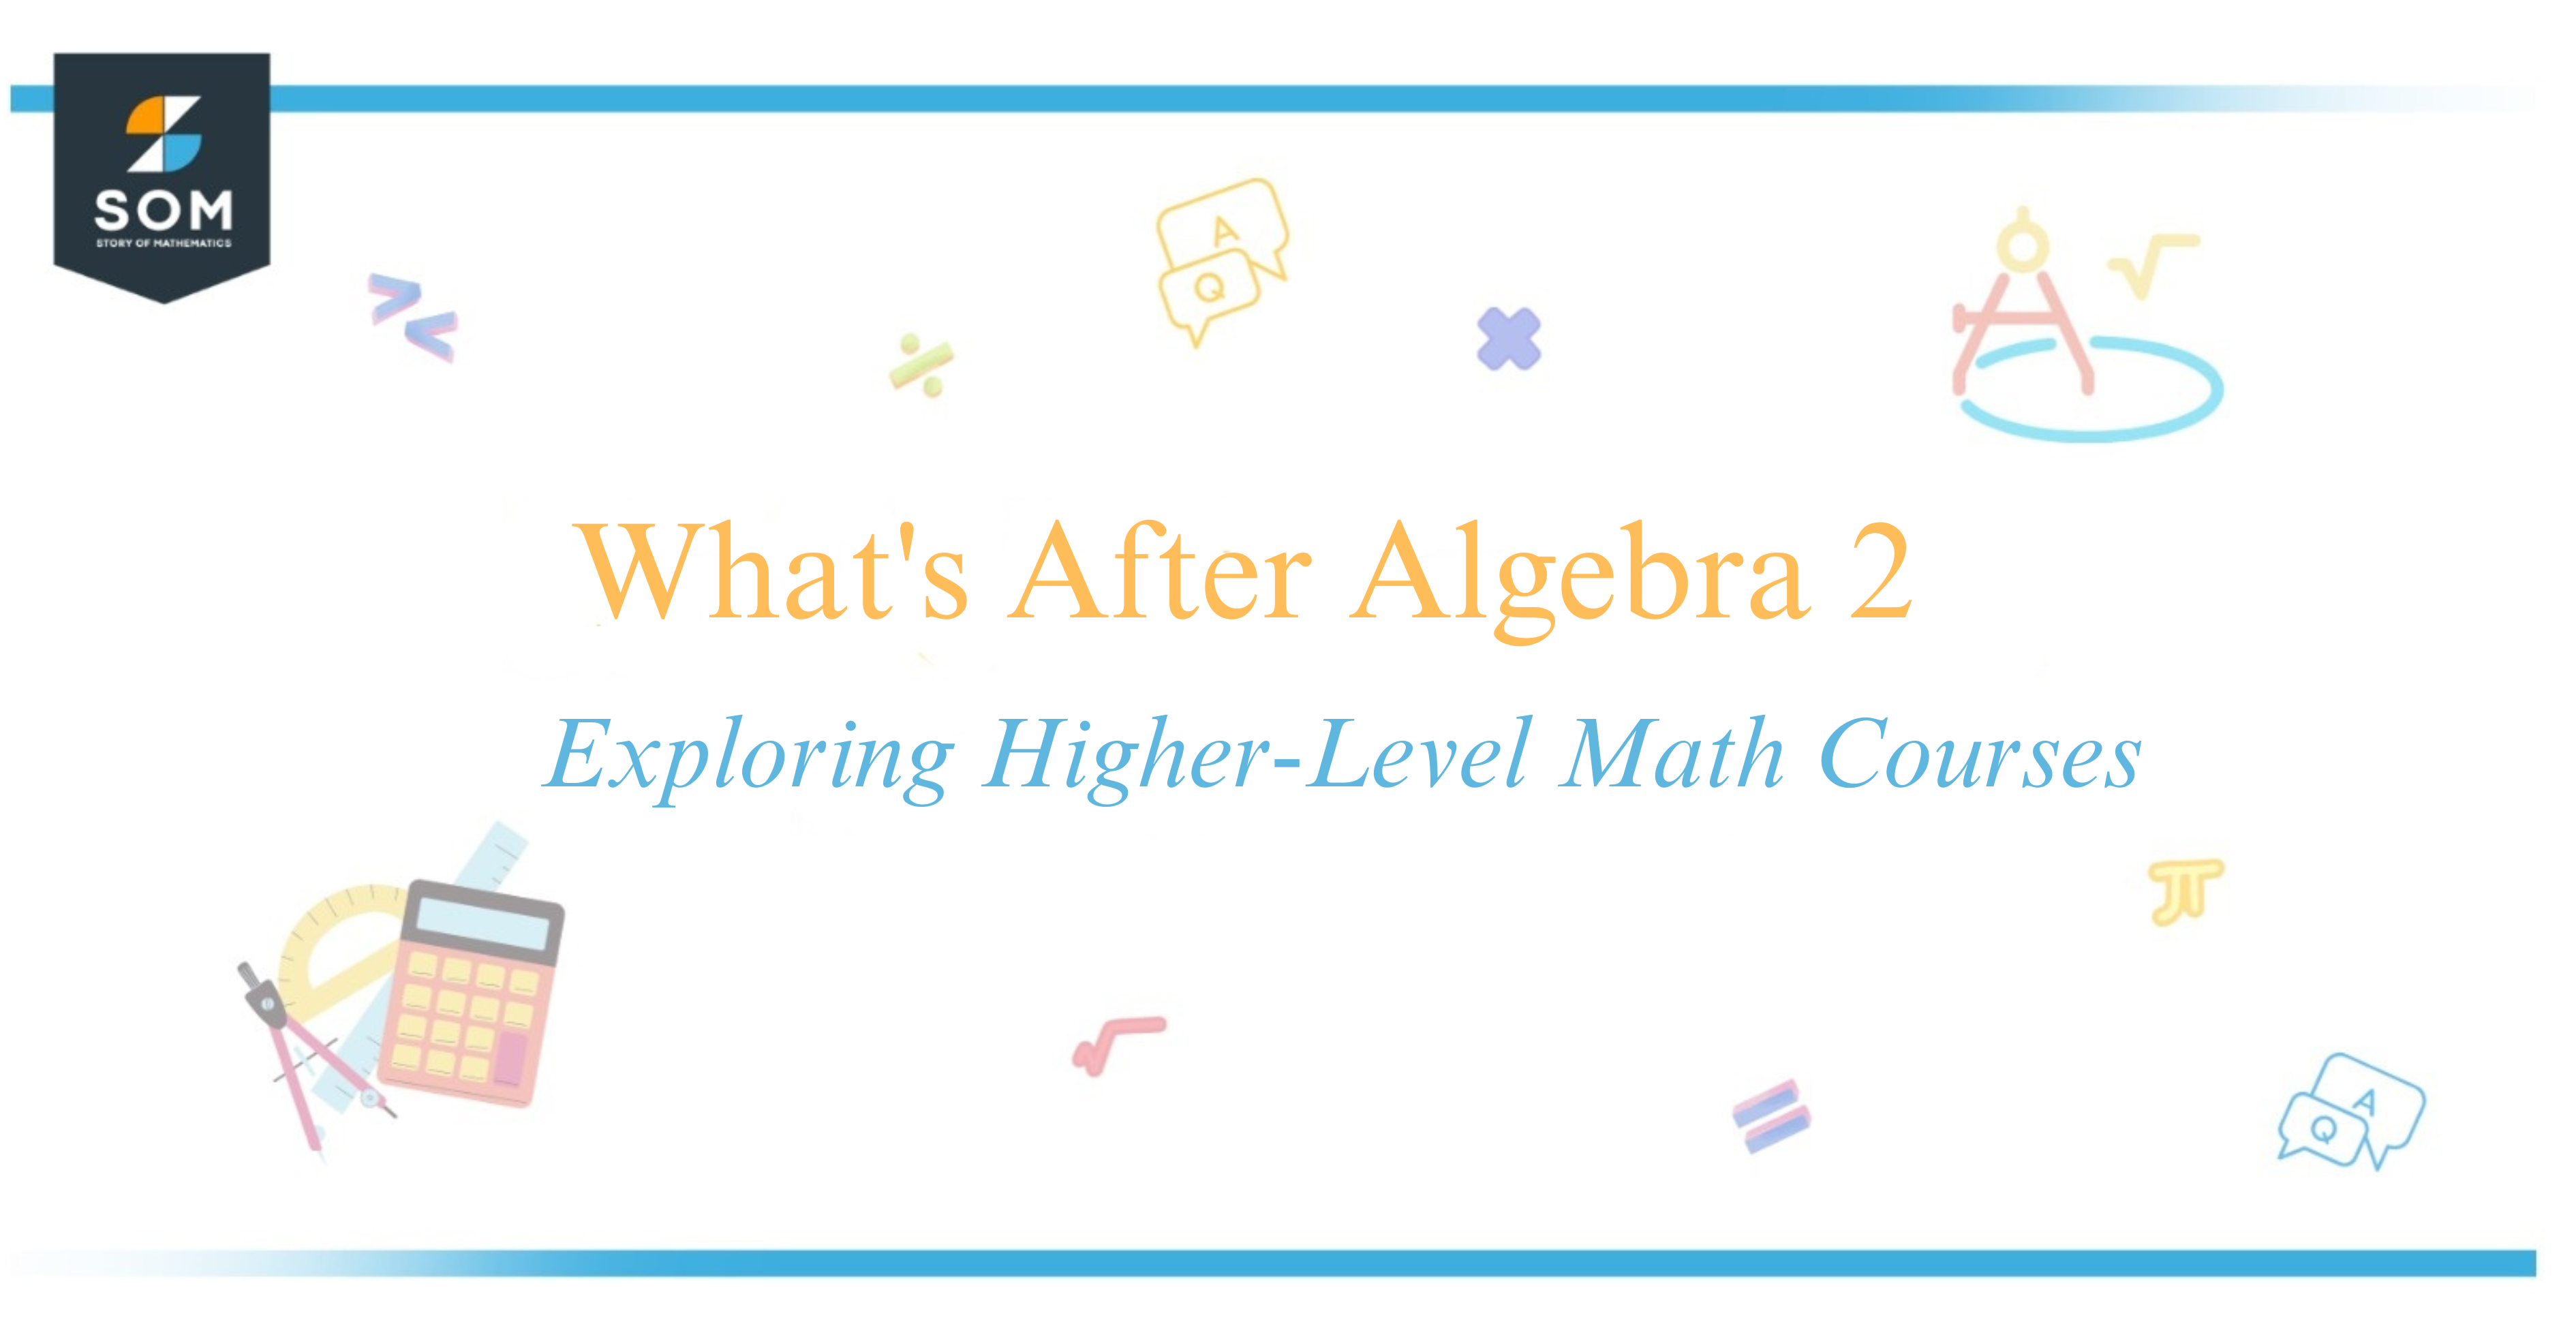 What's After Algebra 2 Exploring Higher-Level Math Courses